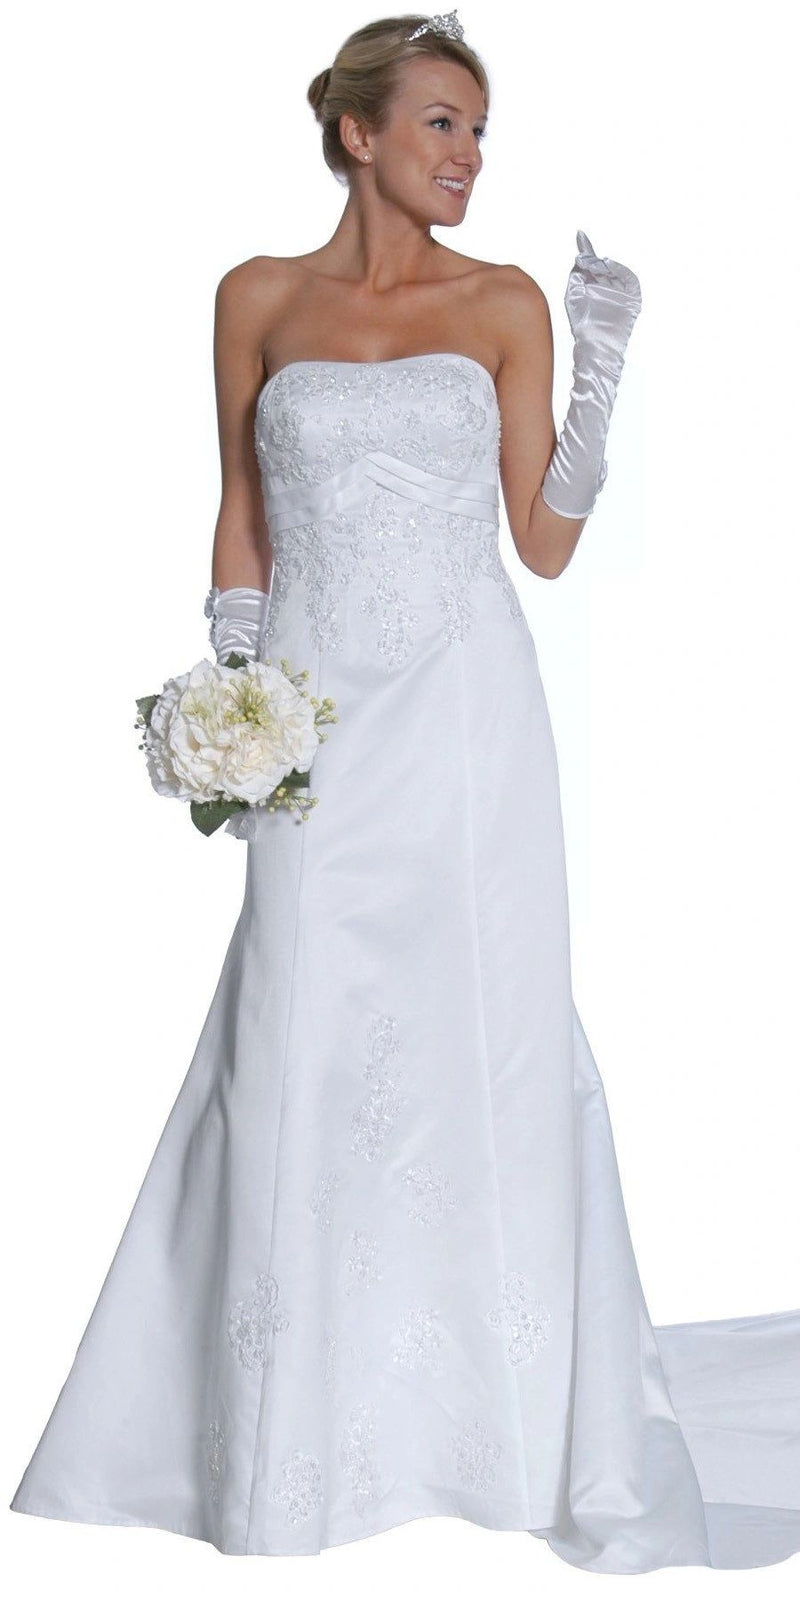 Strapless White Beaded Wedding Dress With Train